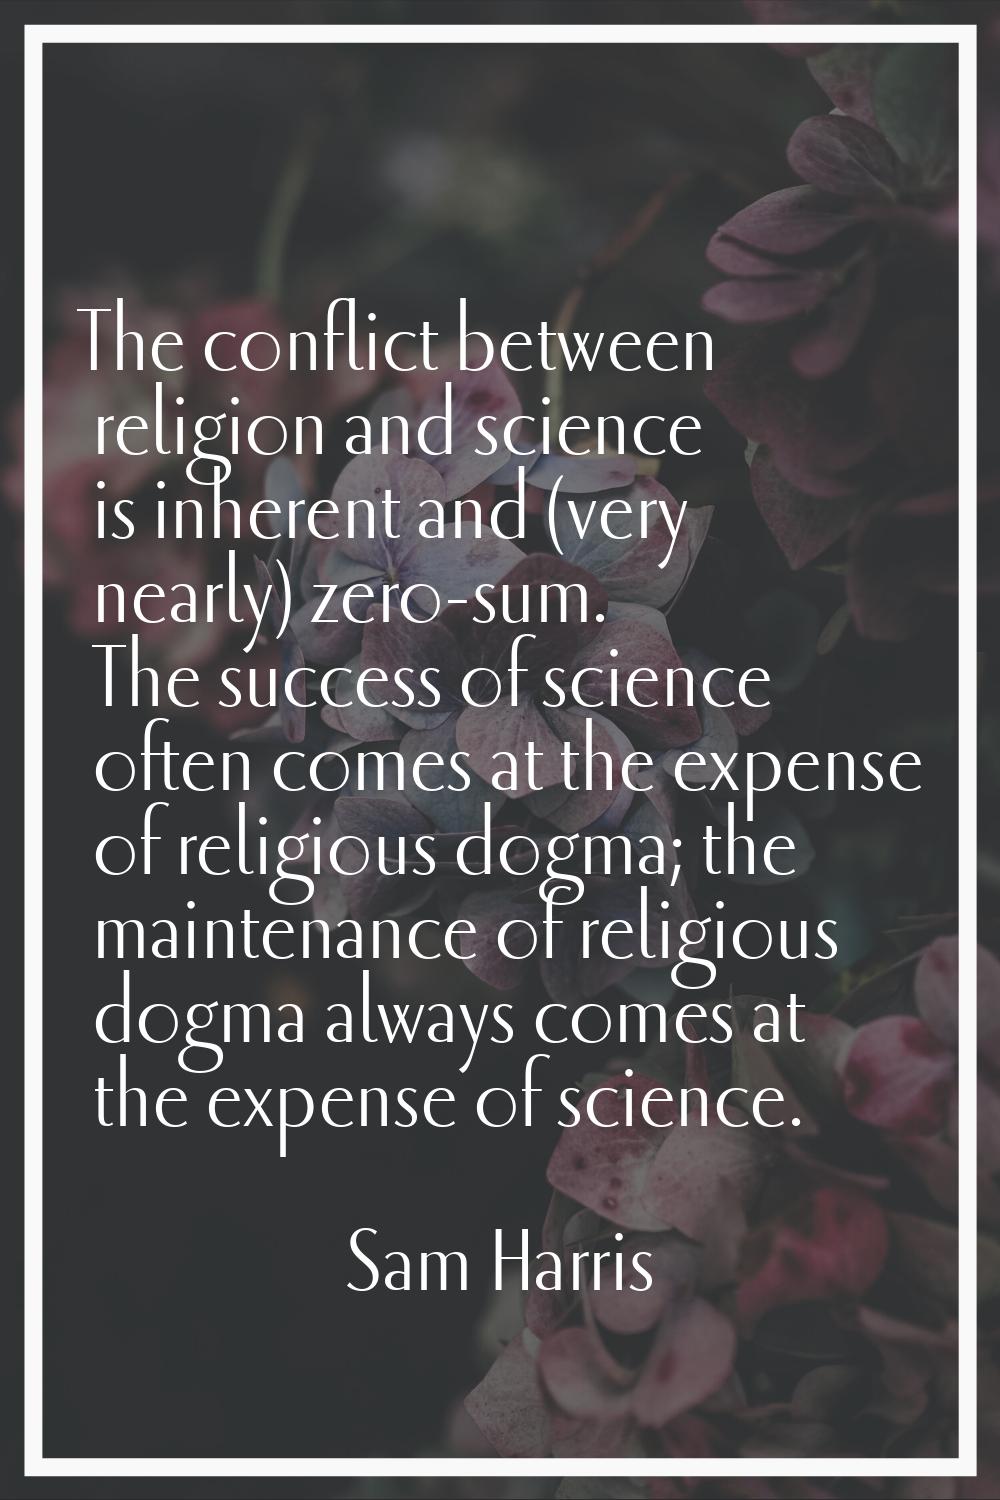 The conflict between religion and science is inherent and (very nearly) zero-sum. The success of sc